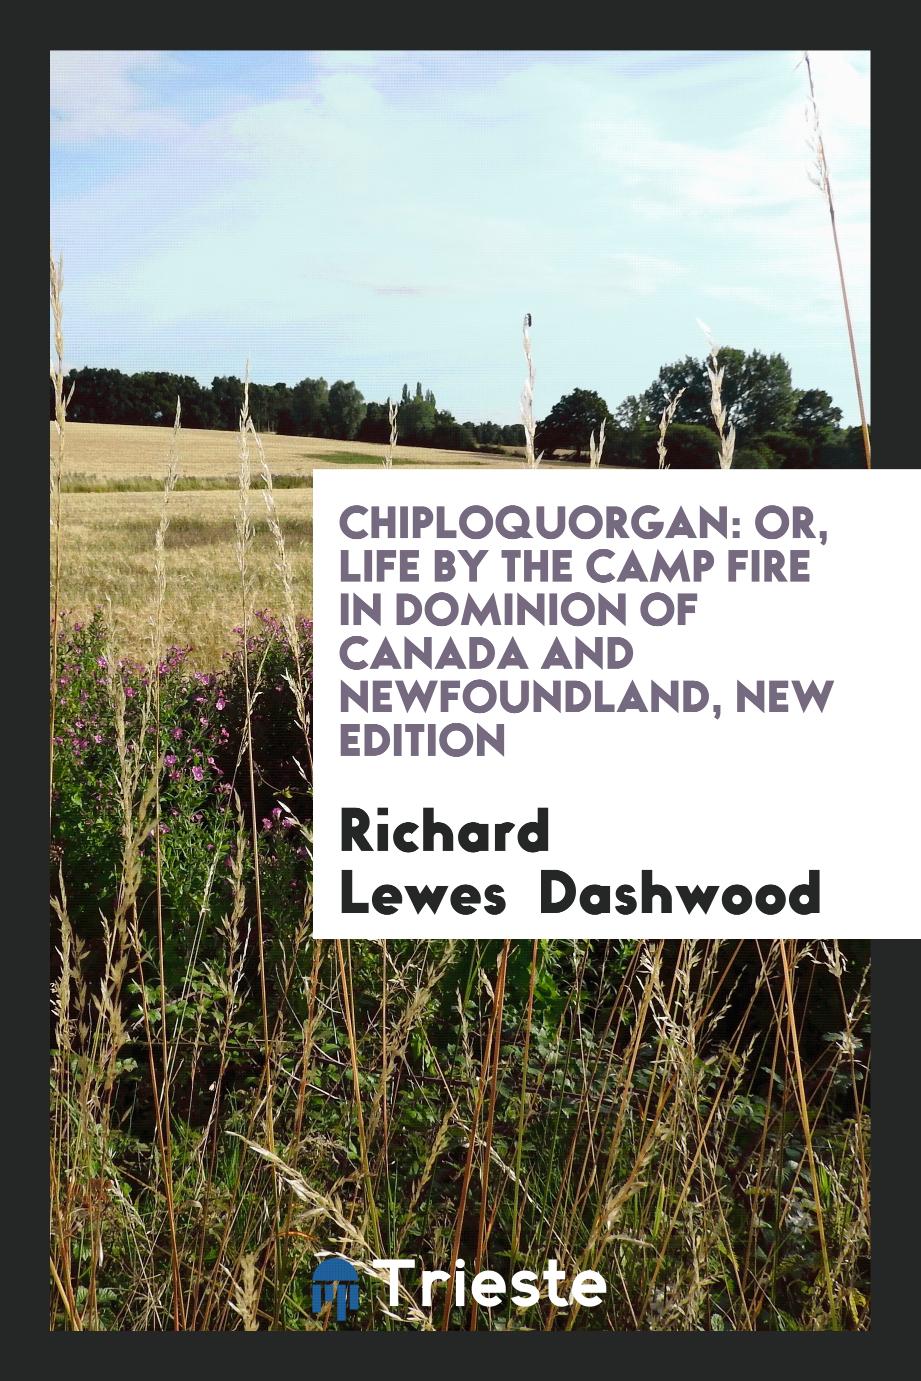 Chiploquorgan: Or, Life by the Camp Fire in Dominion of Canada and Newfoundland, New Edition